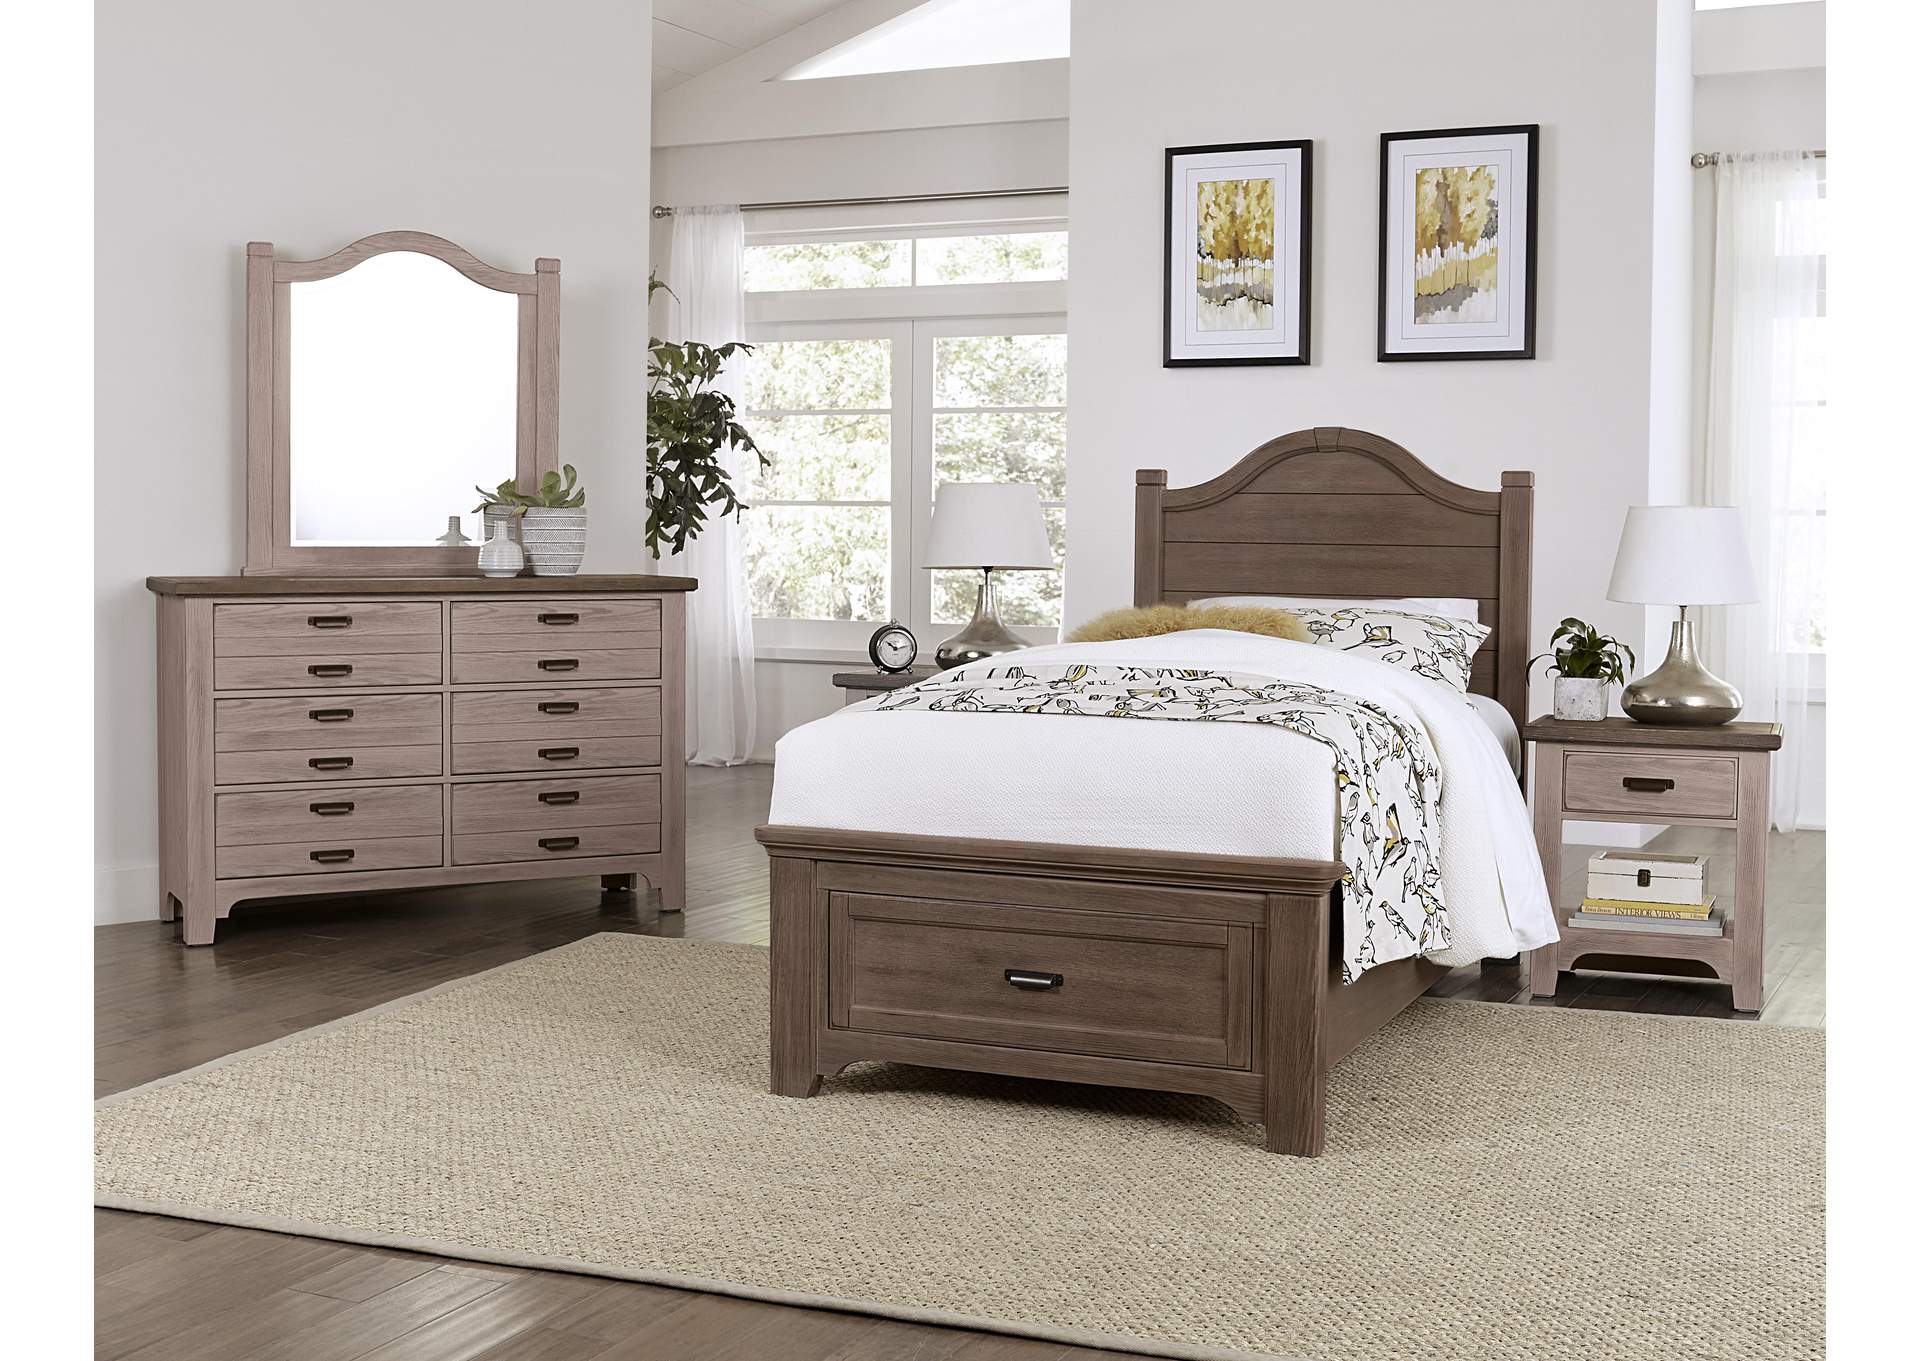 Bungalow Dover Grey with Folkstone Top Night Stand - 1 Drawer,Vaughan-Bassett